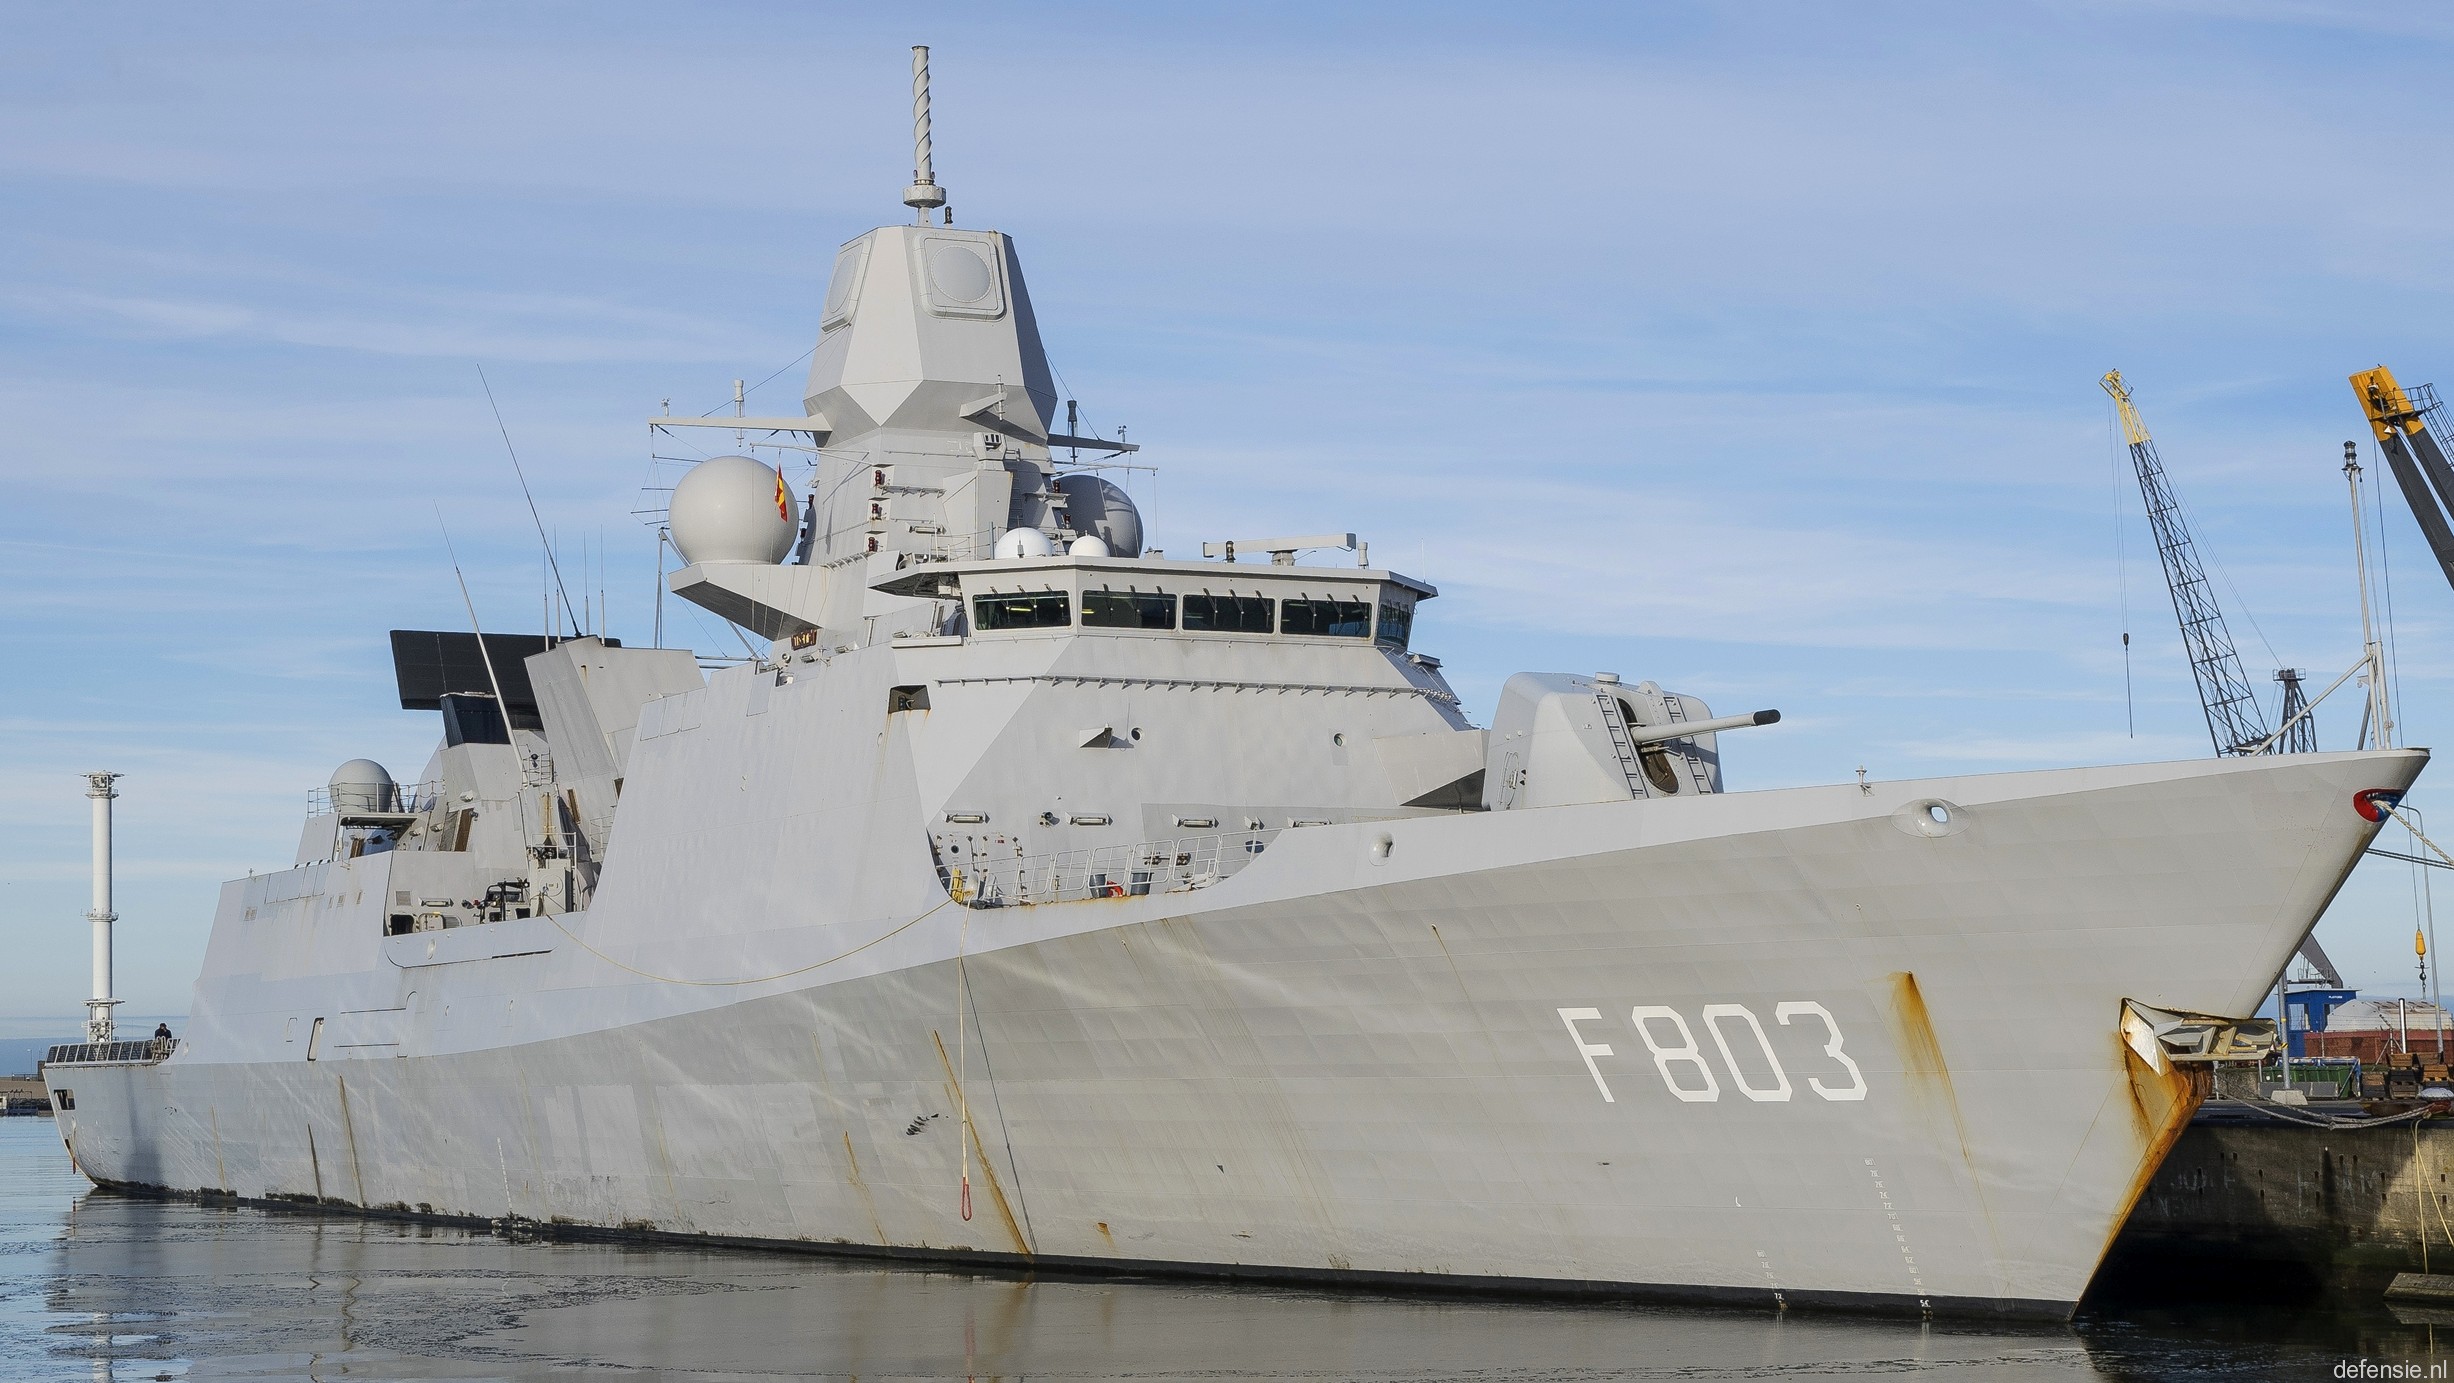 f-803 hnlms tromp guided missile frigate ffg air defense lcf royal netherlands navy 25